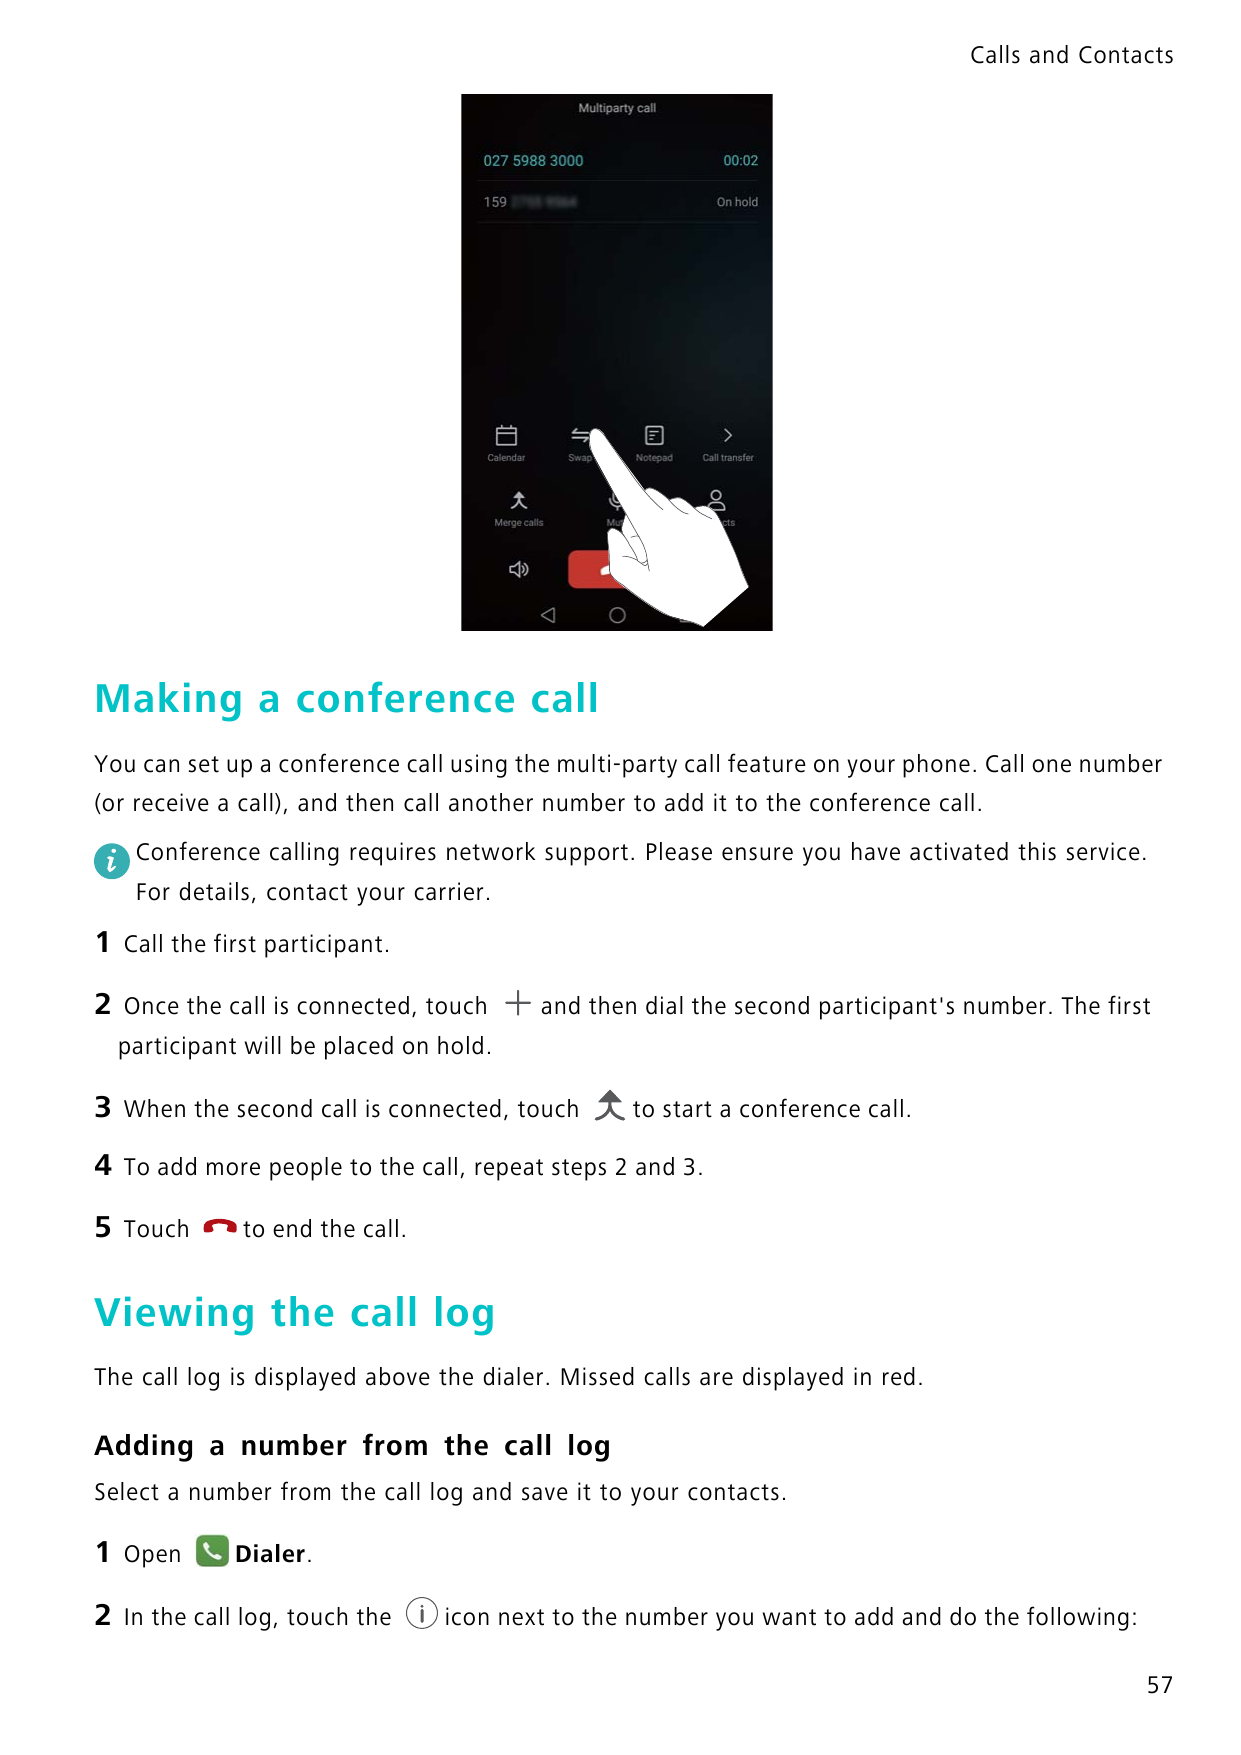 Calls and ContactsMaking a conference callYou can set up a conference call using the multi-party call feature on your phone. Cal